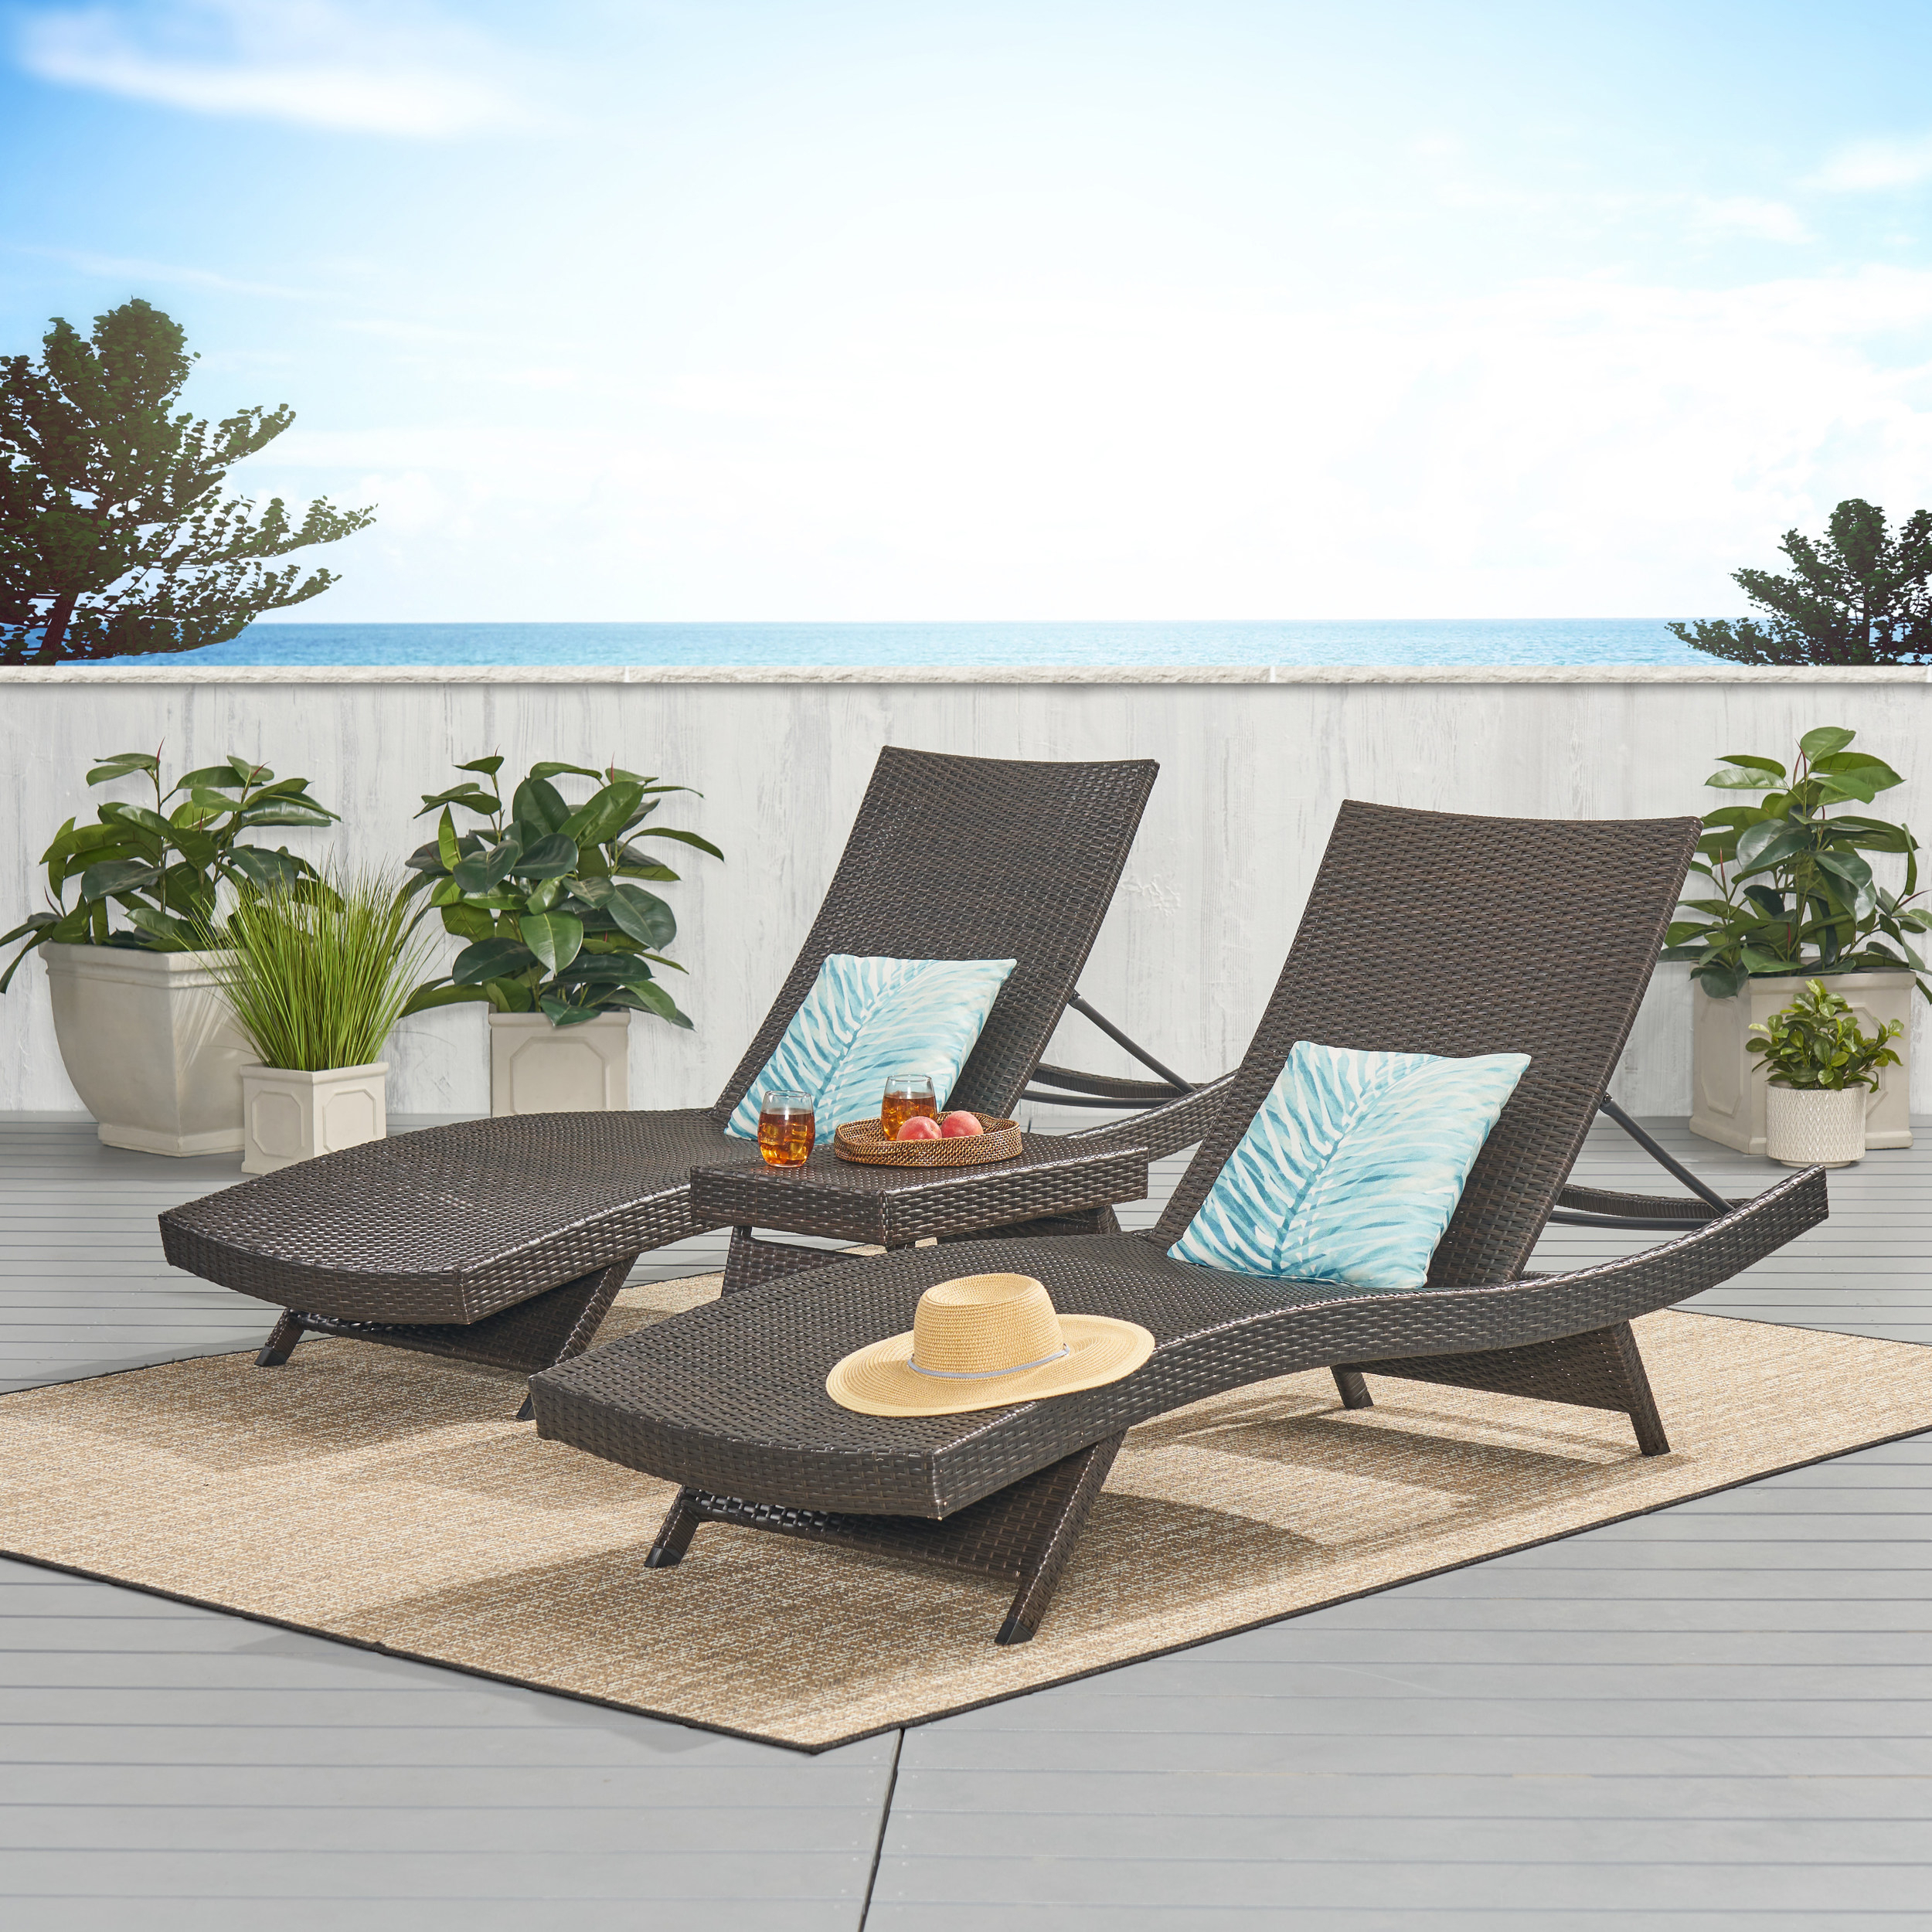 Lakeport 3pc Outdoor Wicker Chaise Lounge & Table Set